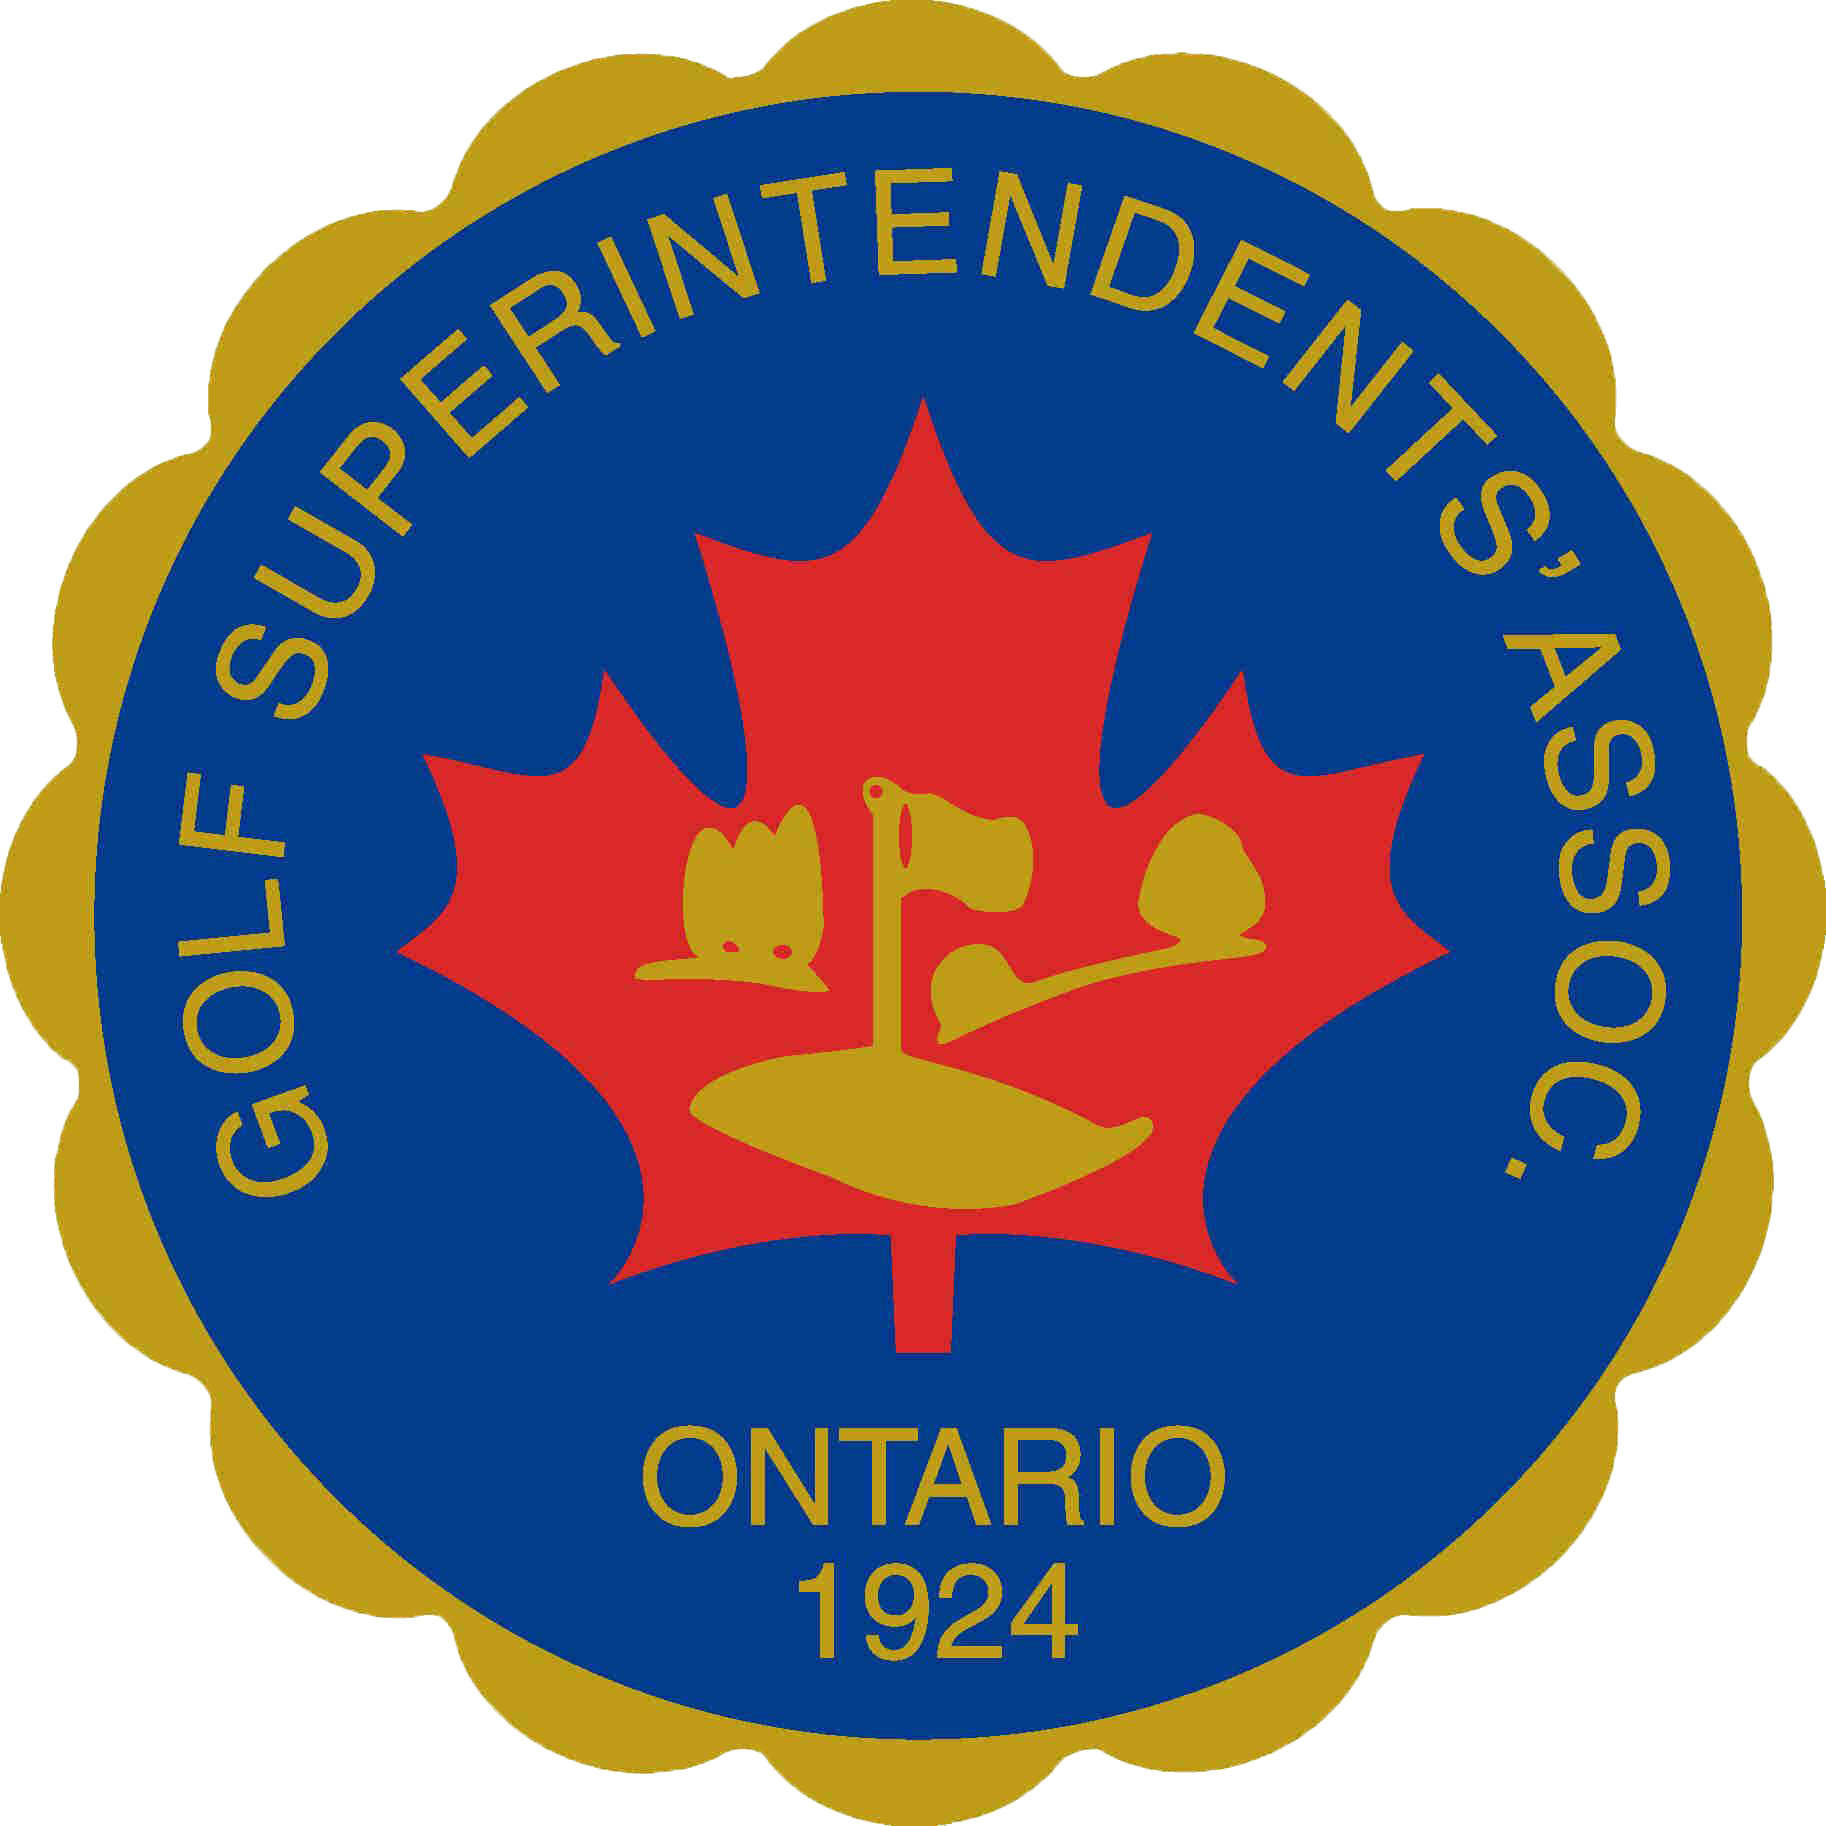 This image is a colorful emblem for the Golf Superintendents Association of Ontario, established in 1924, featuring a maple leaf and golf imagery.